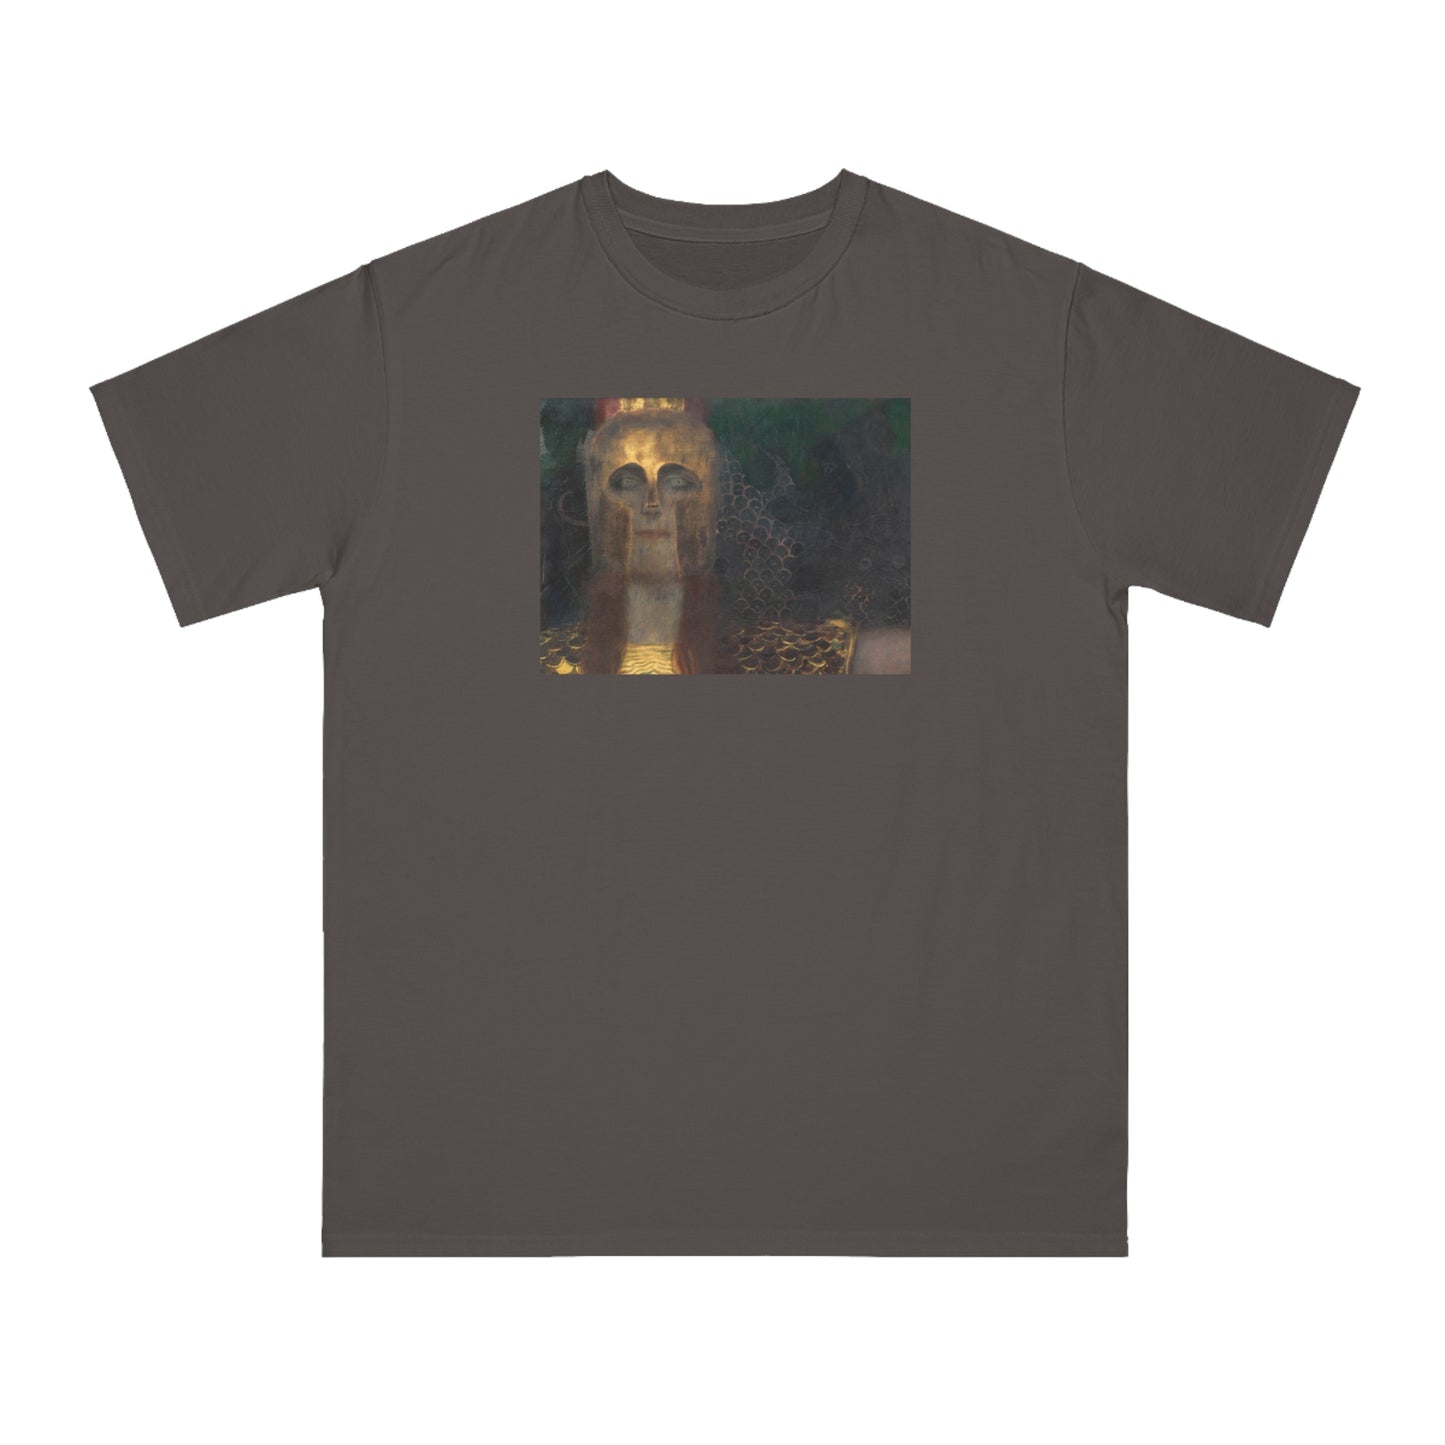 a t - shirt with a picture of a dog on it